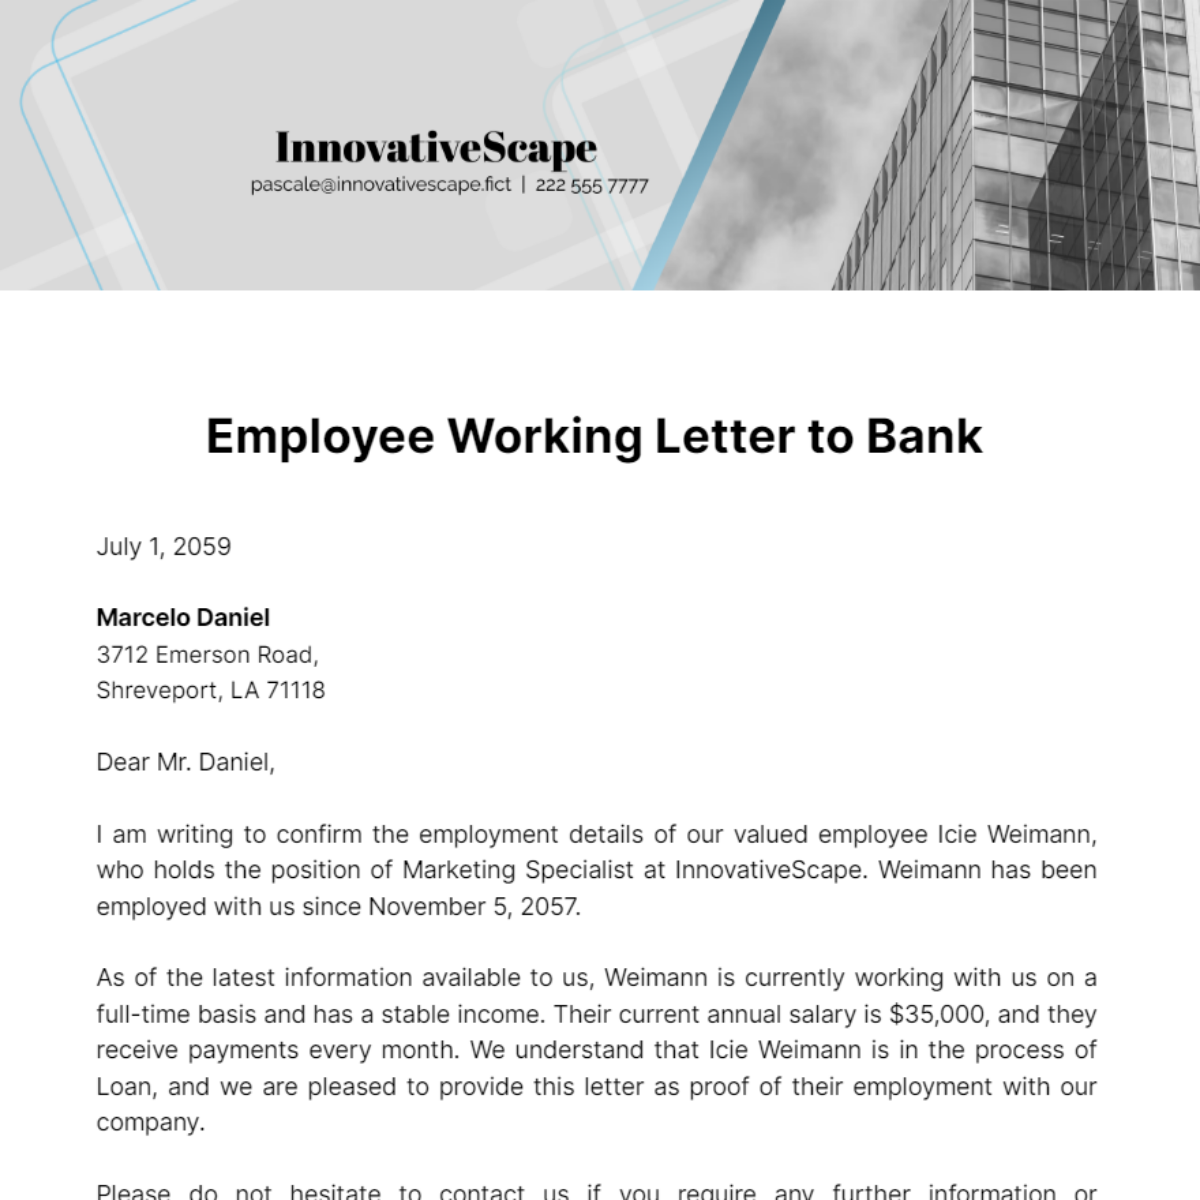 Employee Working Letter to Bank Template